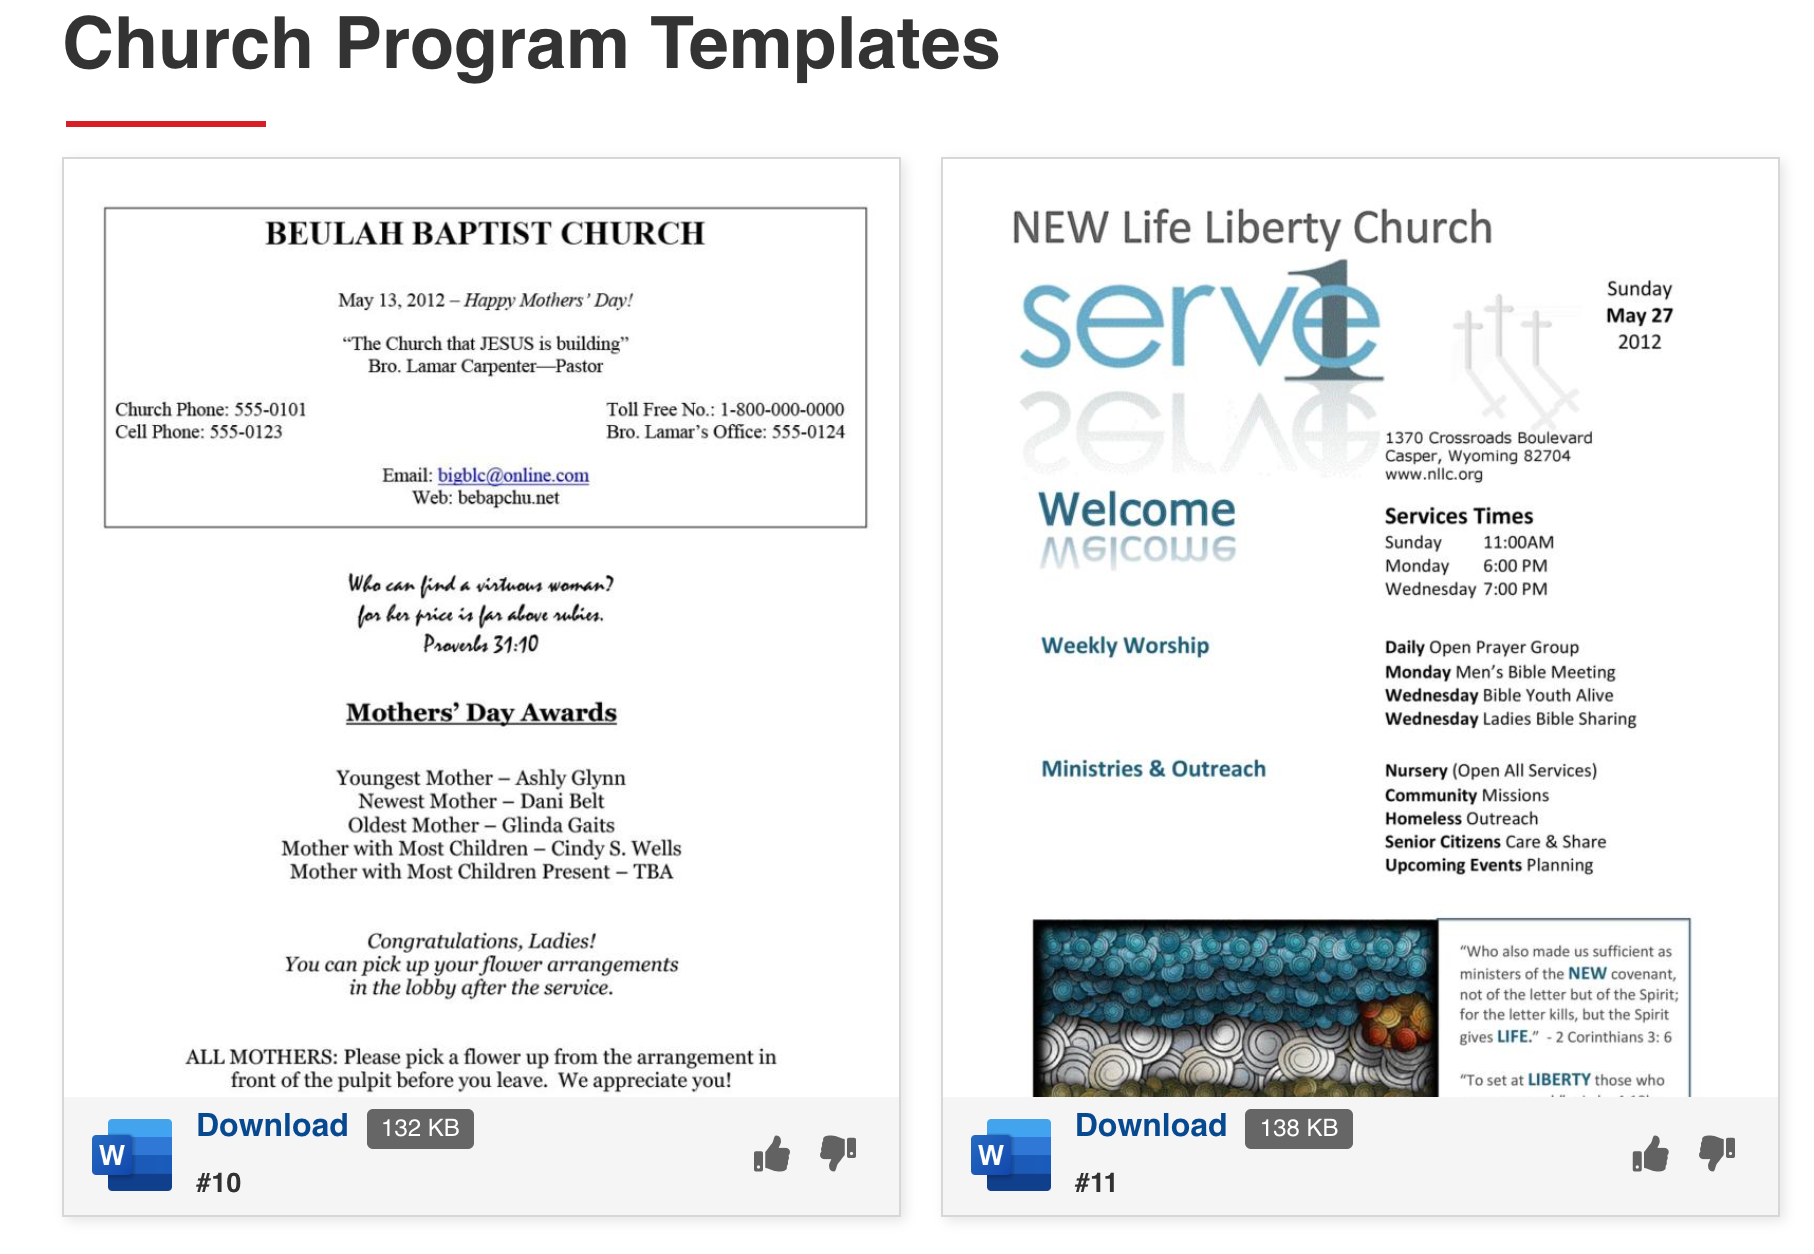 How to Effectively use Church Bulletin Templates - REACHRIGHT